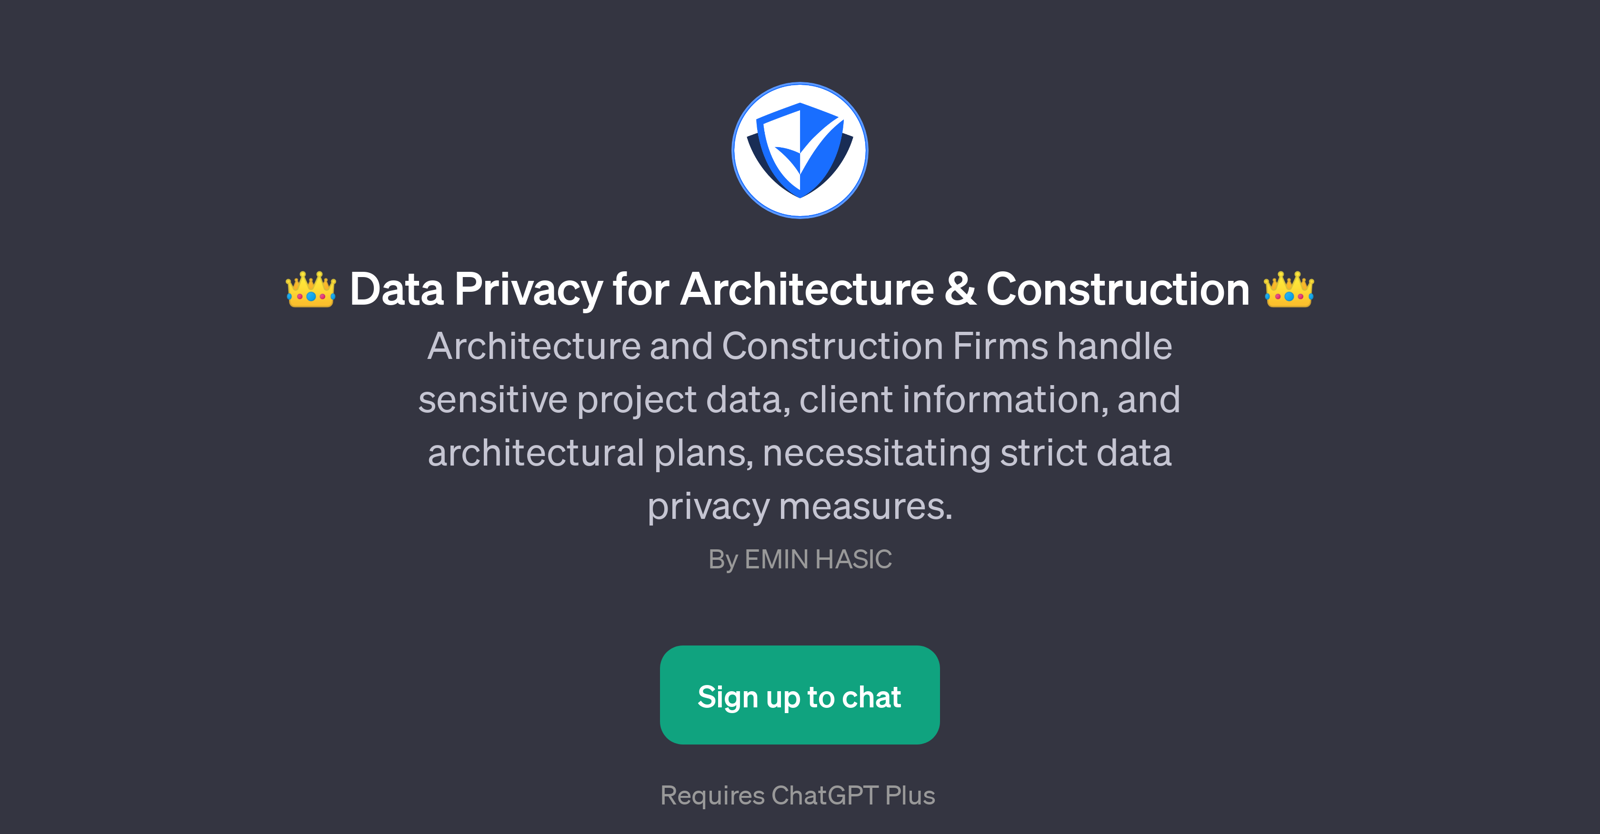 Data Privacy for Architecture & Construction website